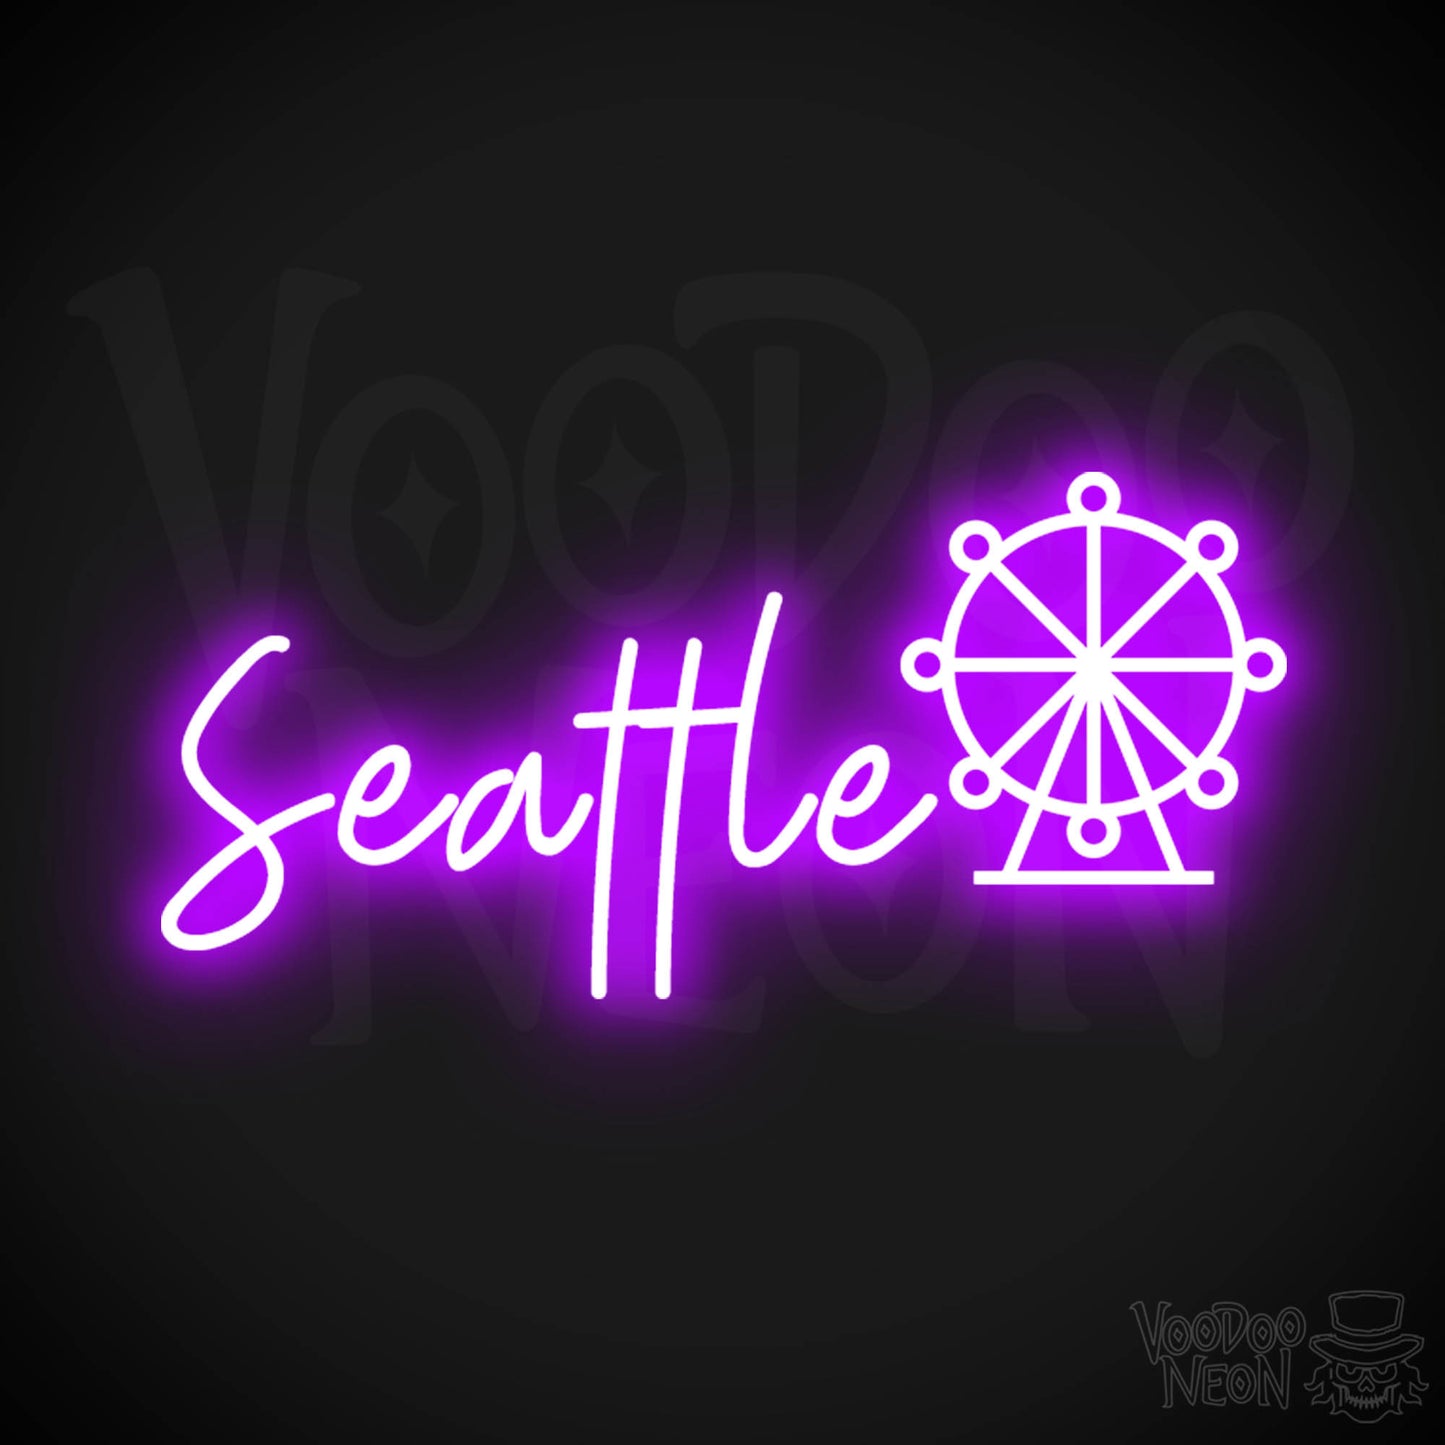 Seattle Neon Sign - Neon Seattle Sign - LED Signs - Wall Art - Color Purple